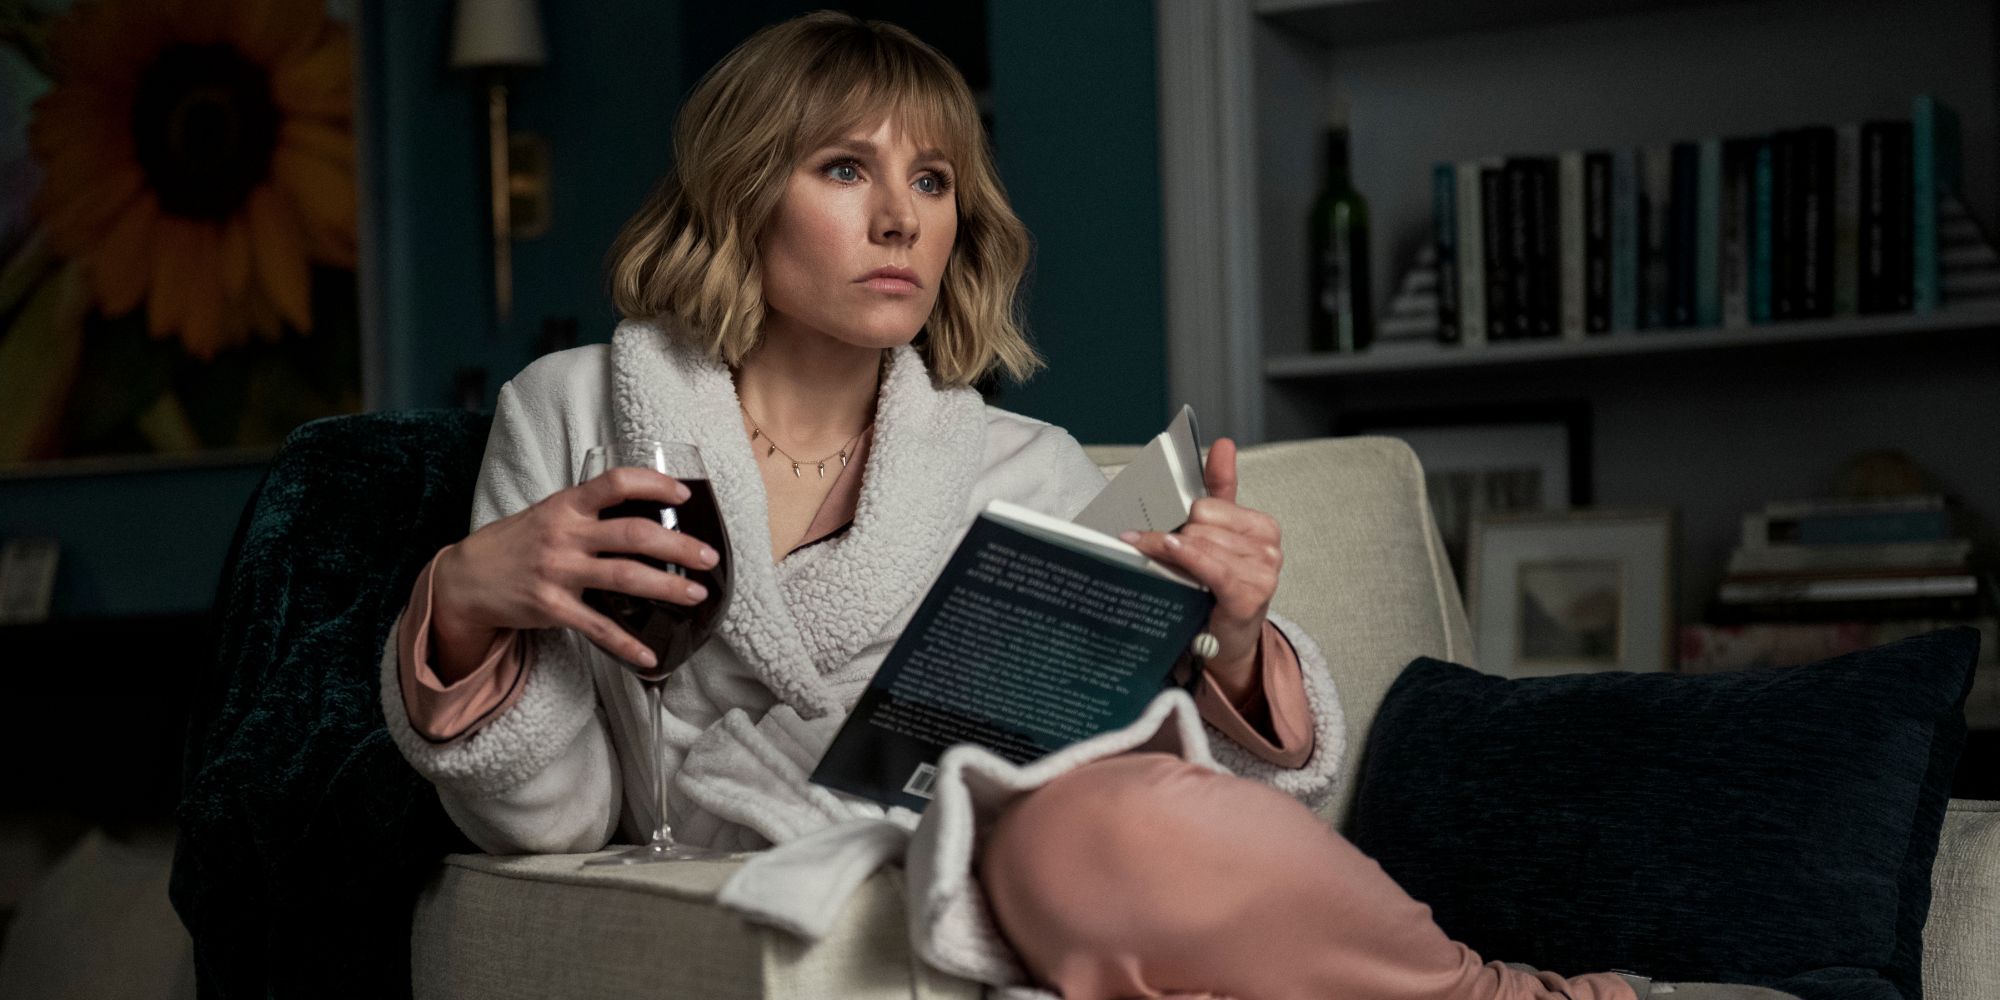 woman in the house kristen bell reading and drinking wine